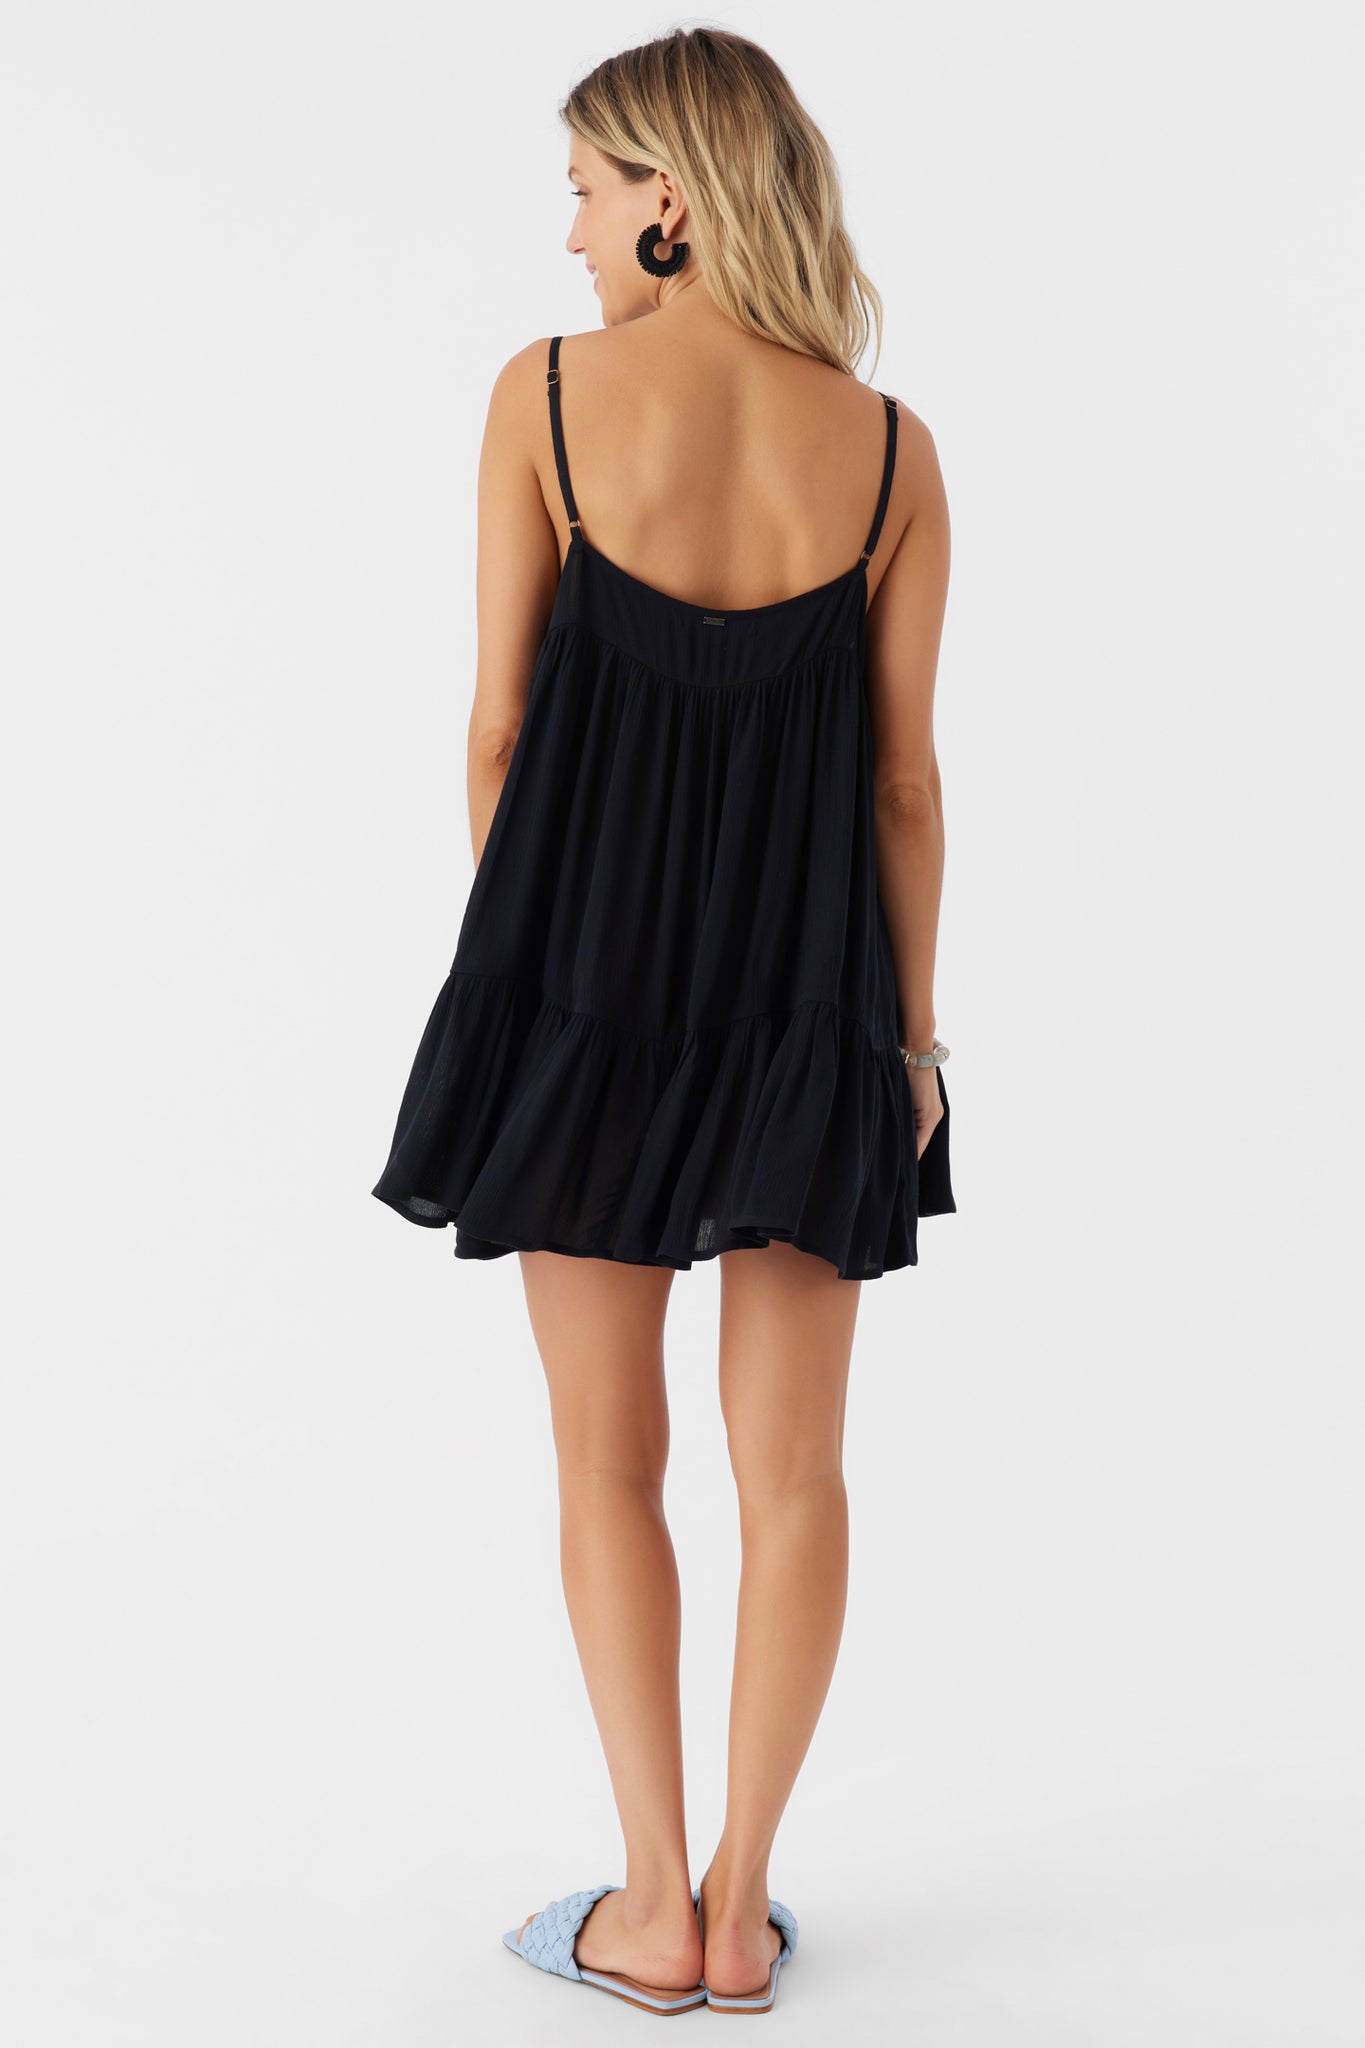 SALTWATER SOLIDS RILEE COVER-UP DRESS